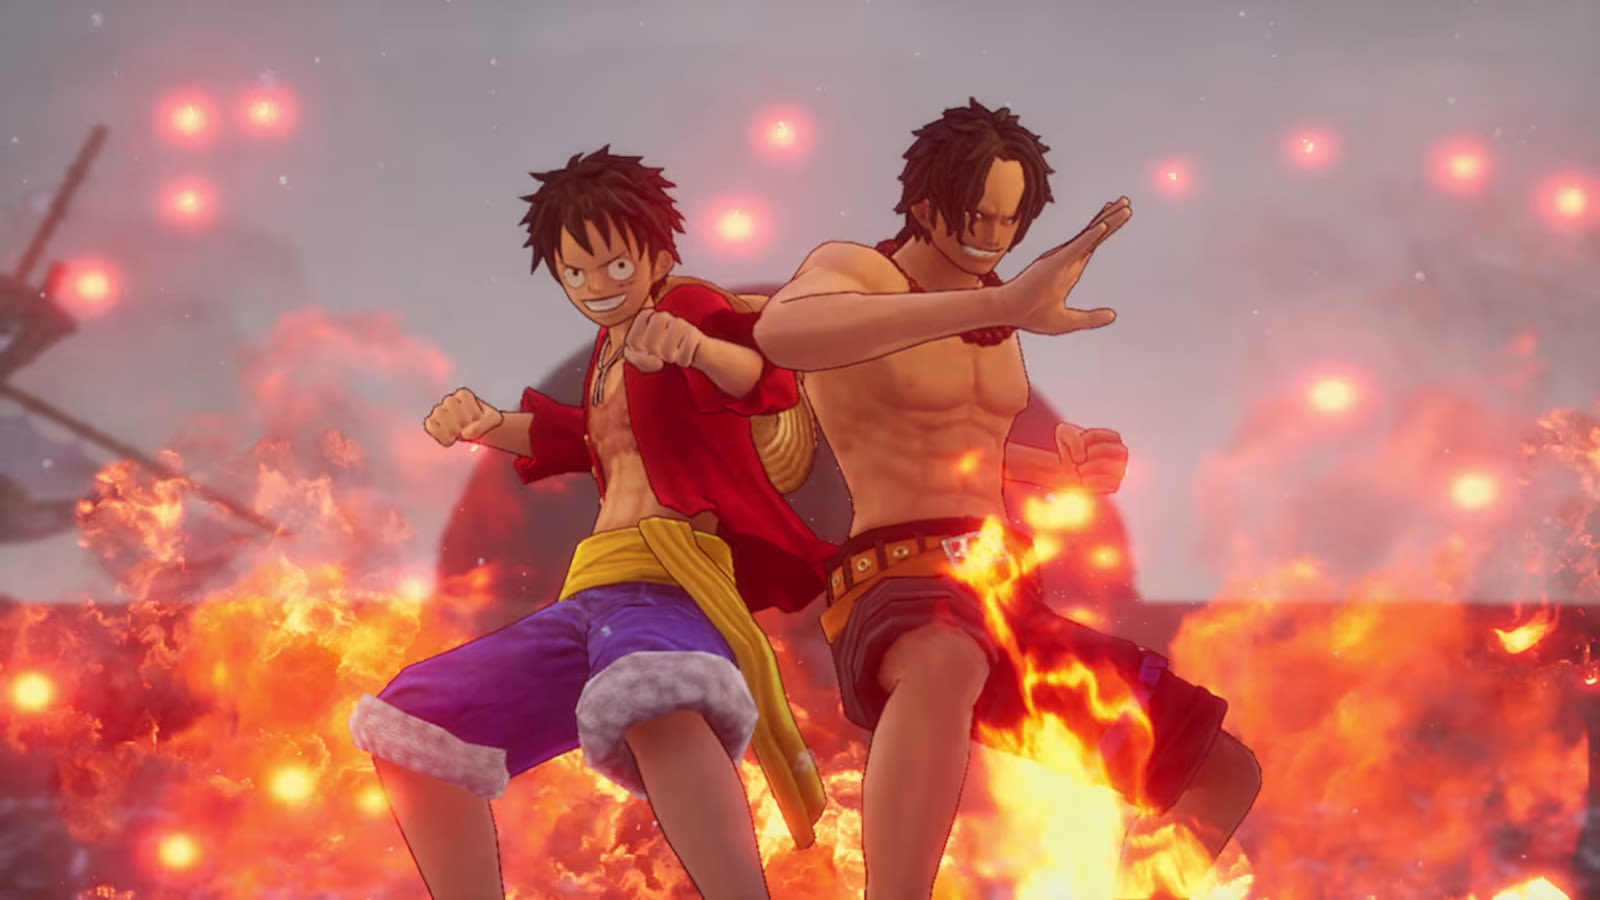 One Piece Odyssey on Switch is a great way to celebrate the 25th anniversary